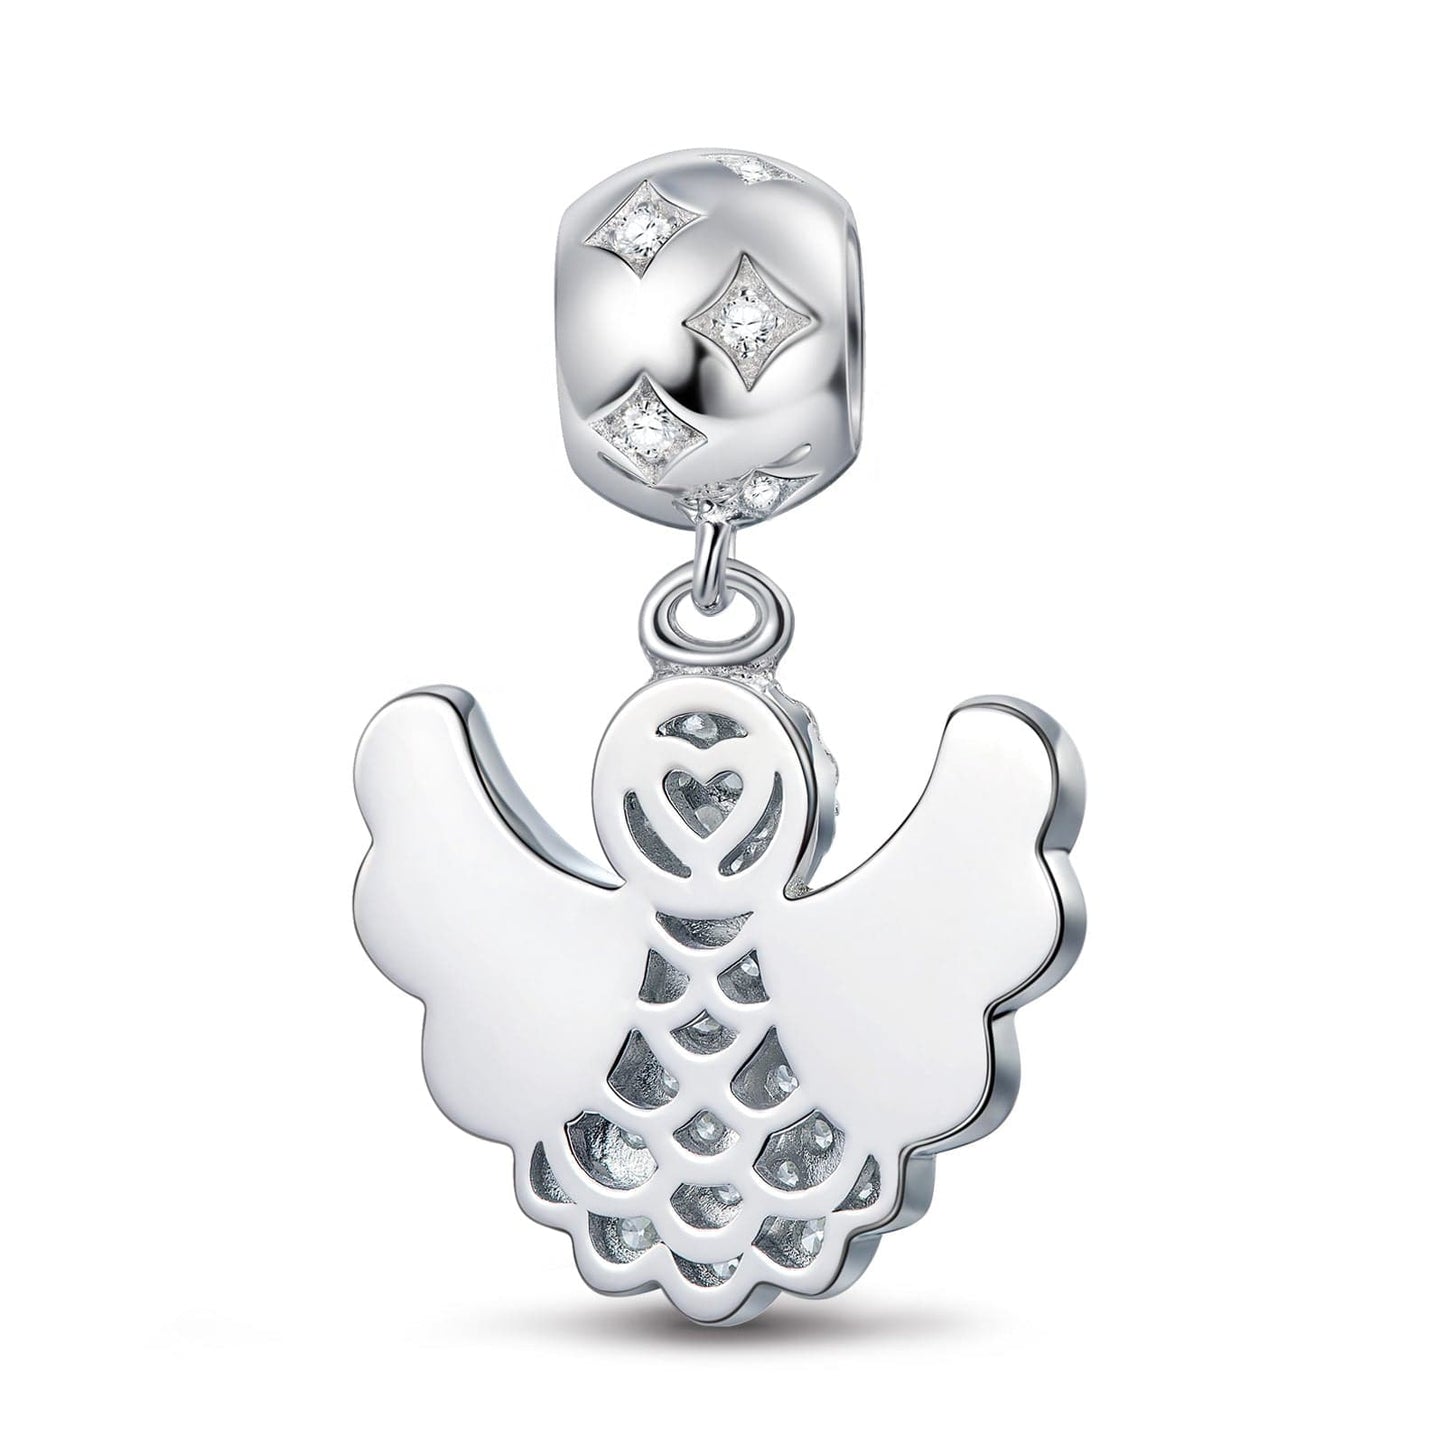 Little Dancing Angel Tarnish-resistant Silver Charms With Enamel In White Gold Plated